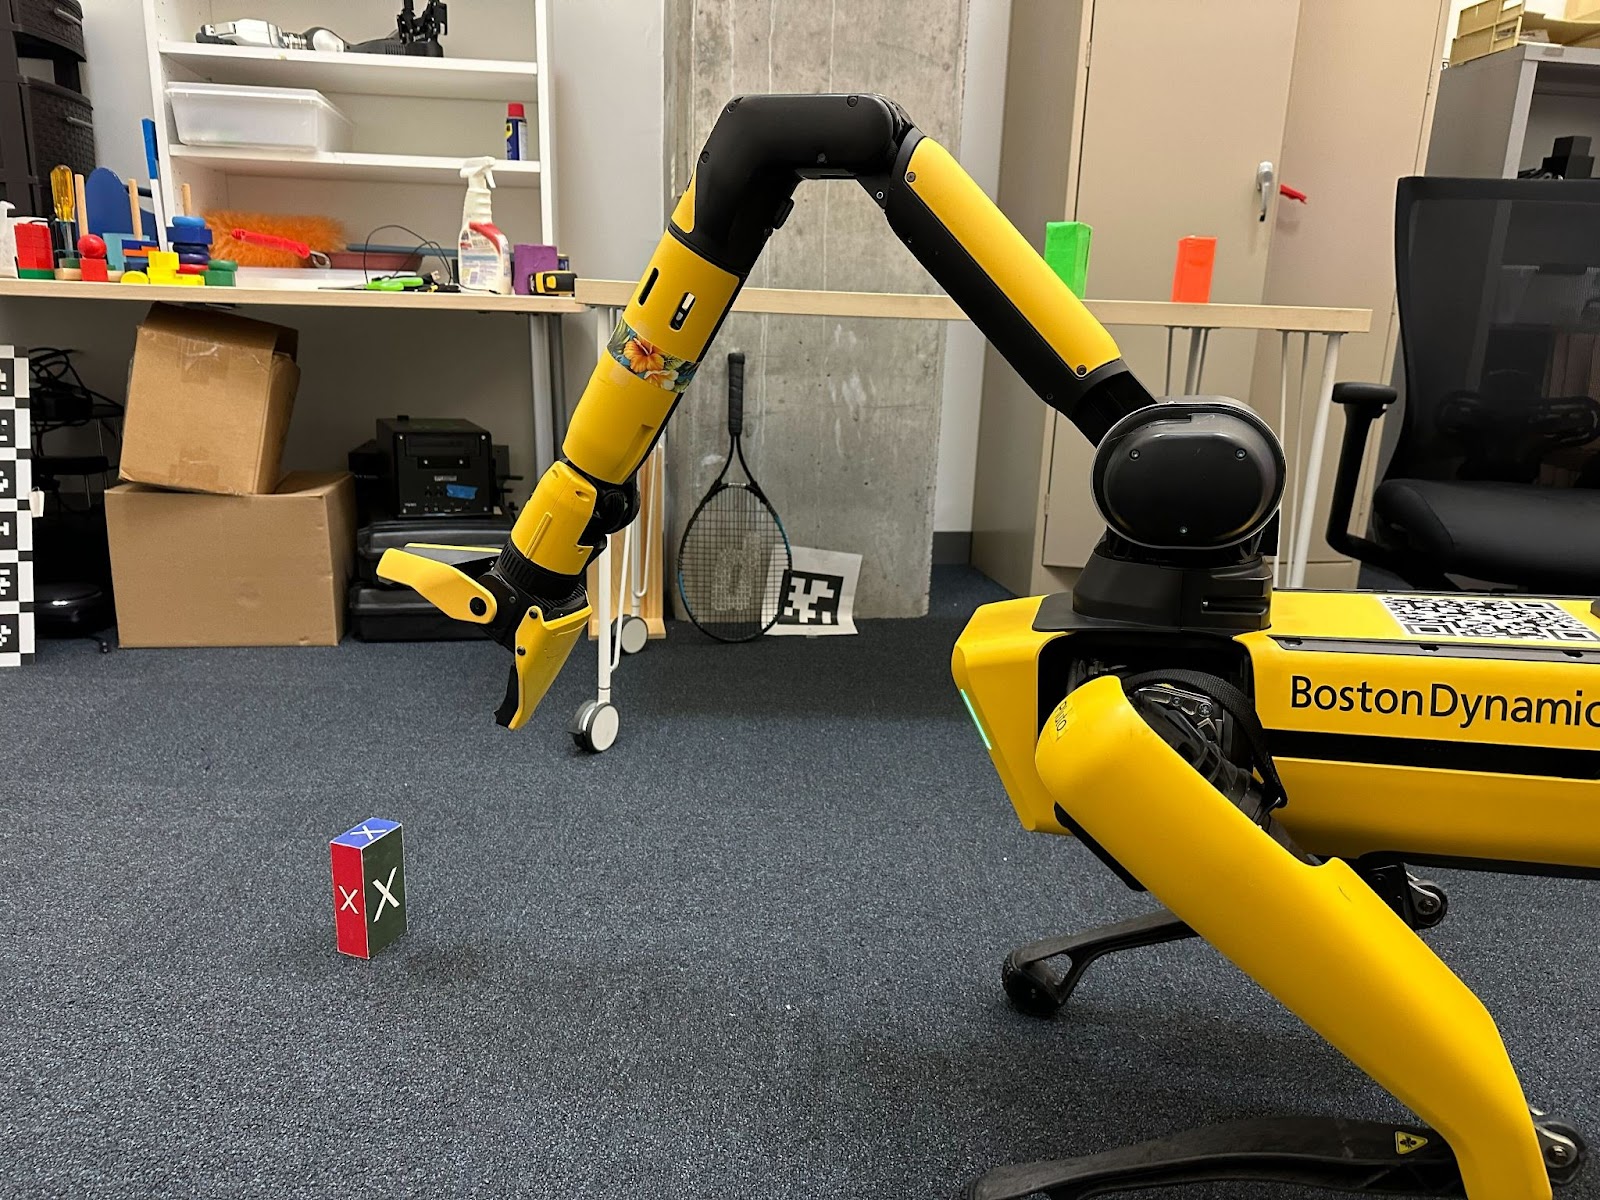 A yellow-and-black Robot reading "Boston Dynamics" on one side poses in the foreground of the photo, the long arm attached to its "head" reaching forwards to pick up a small rectangular box with colorful sides emblazoned with the letter X.